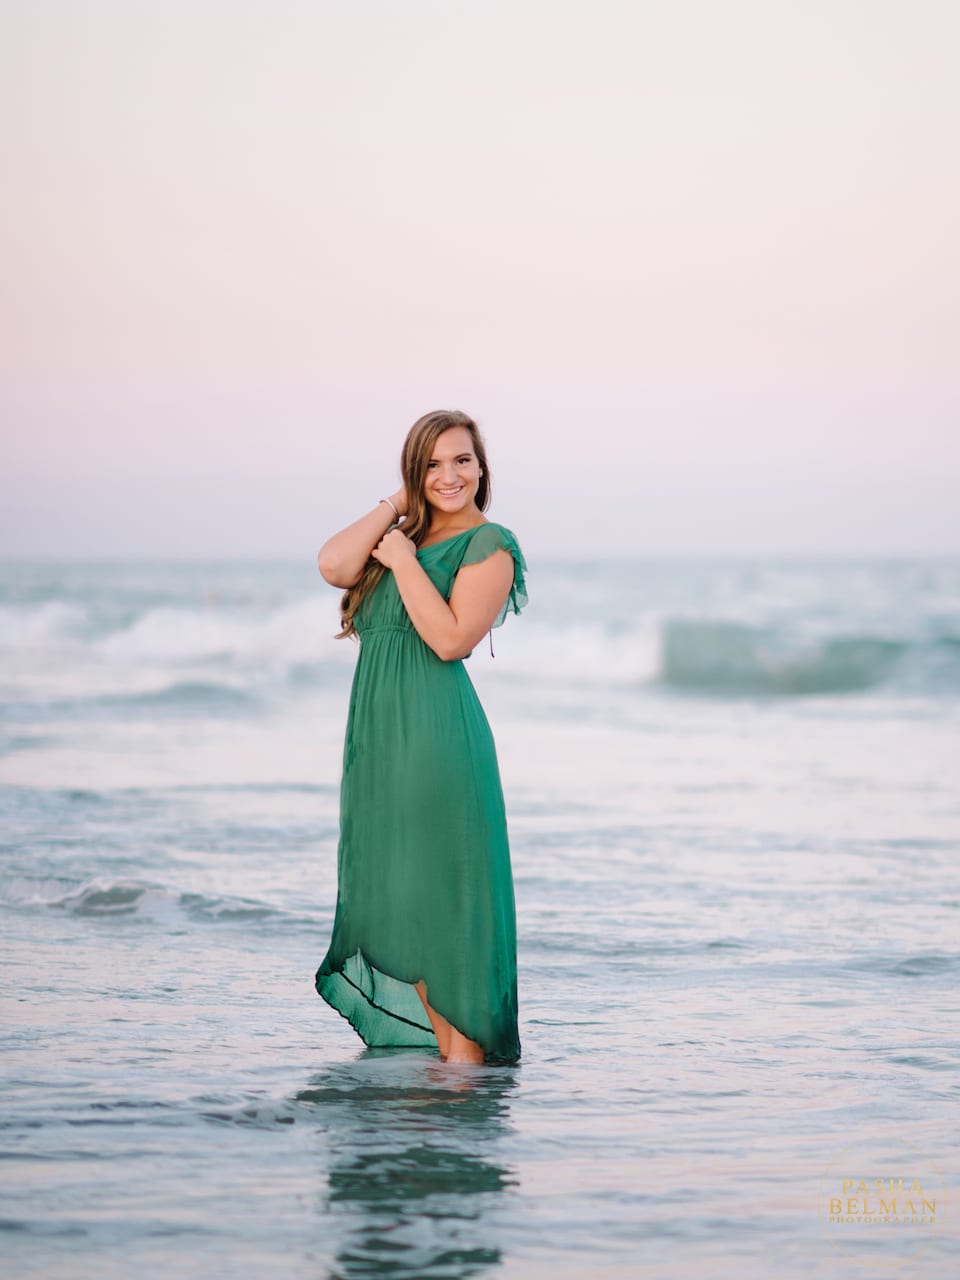 Senior Pictures Ideas for Girls in Myrtle Beach and Charleston | Charleston Senior Photography | Wilmington High School Senior Photography | Myrtle Beach Senior Photography | Fashion Style Senior Pictures | Model Portfolio Photography | High-end Senior Pictures 